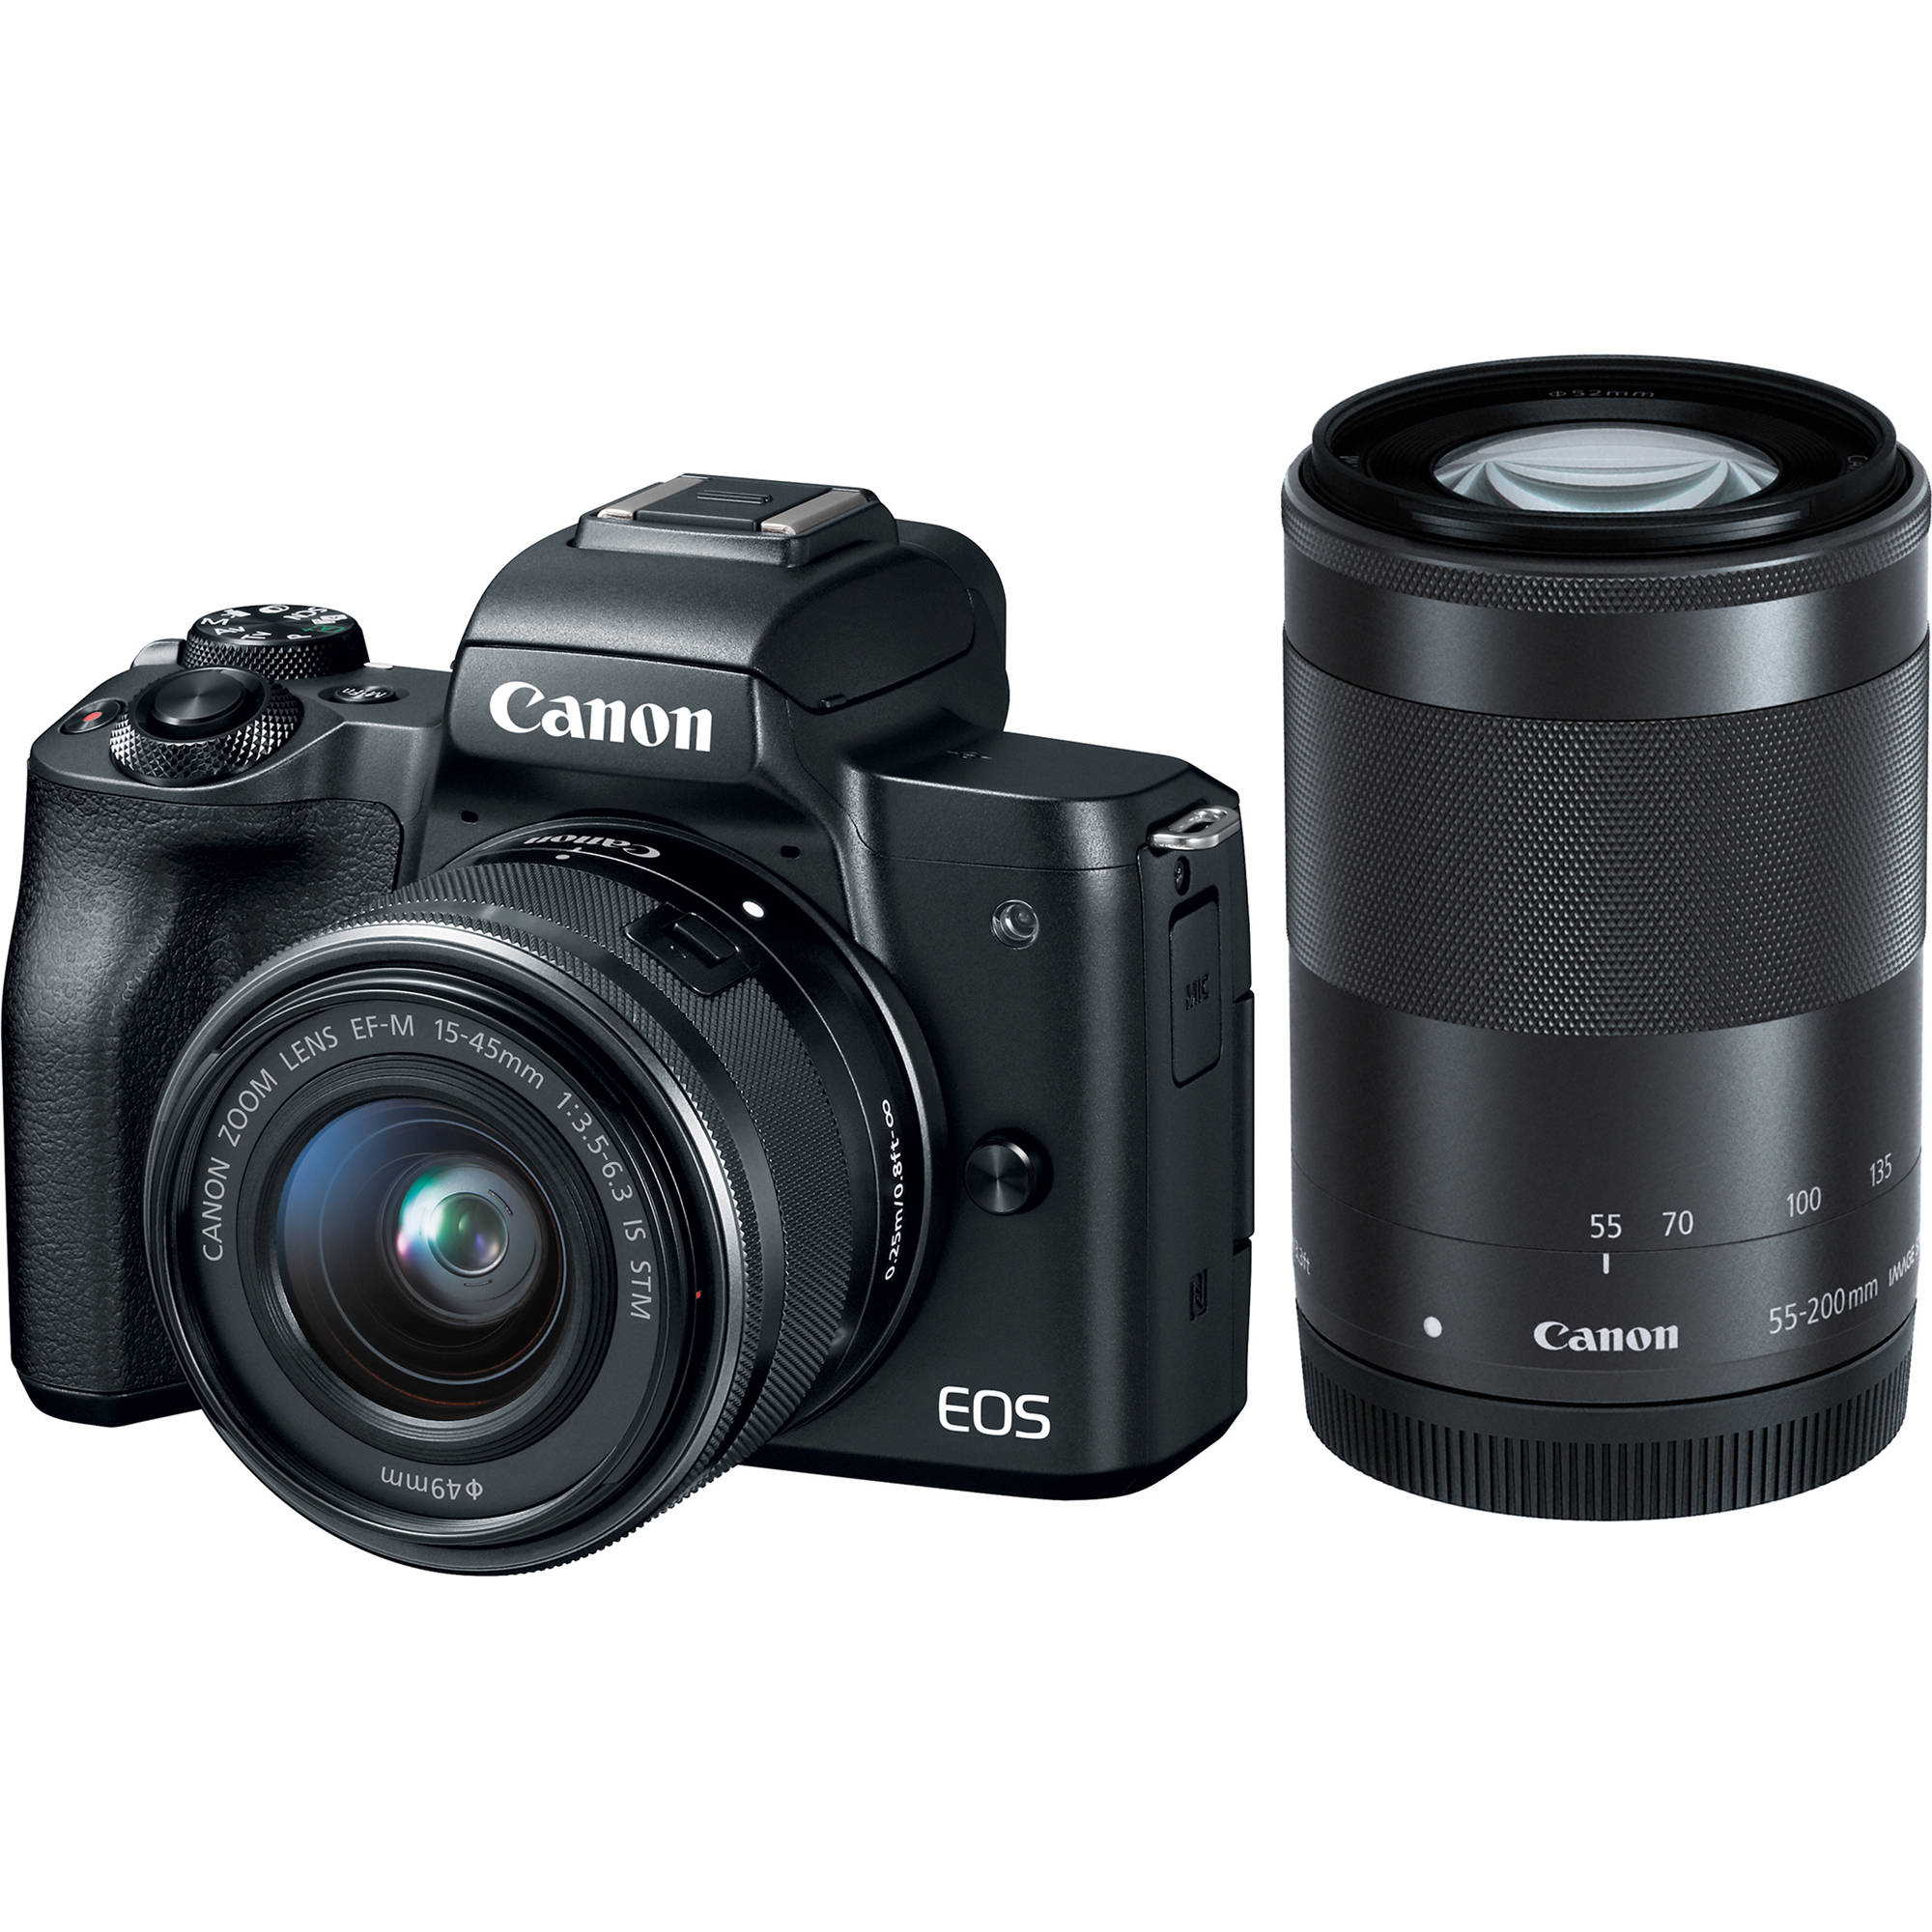 Canon EOS M50: a week with an expert